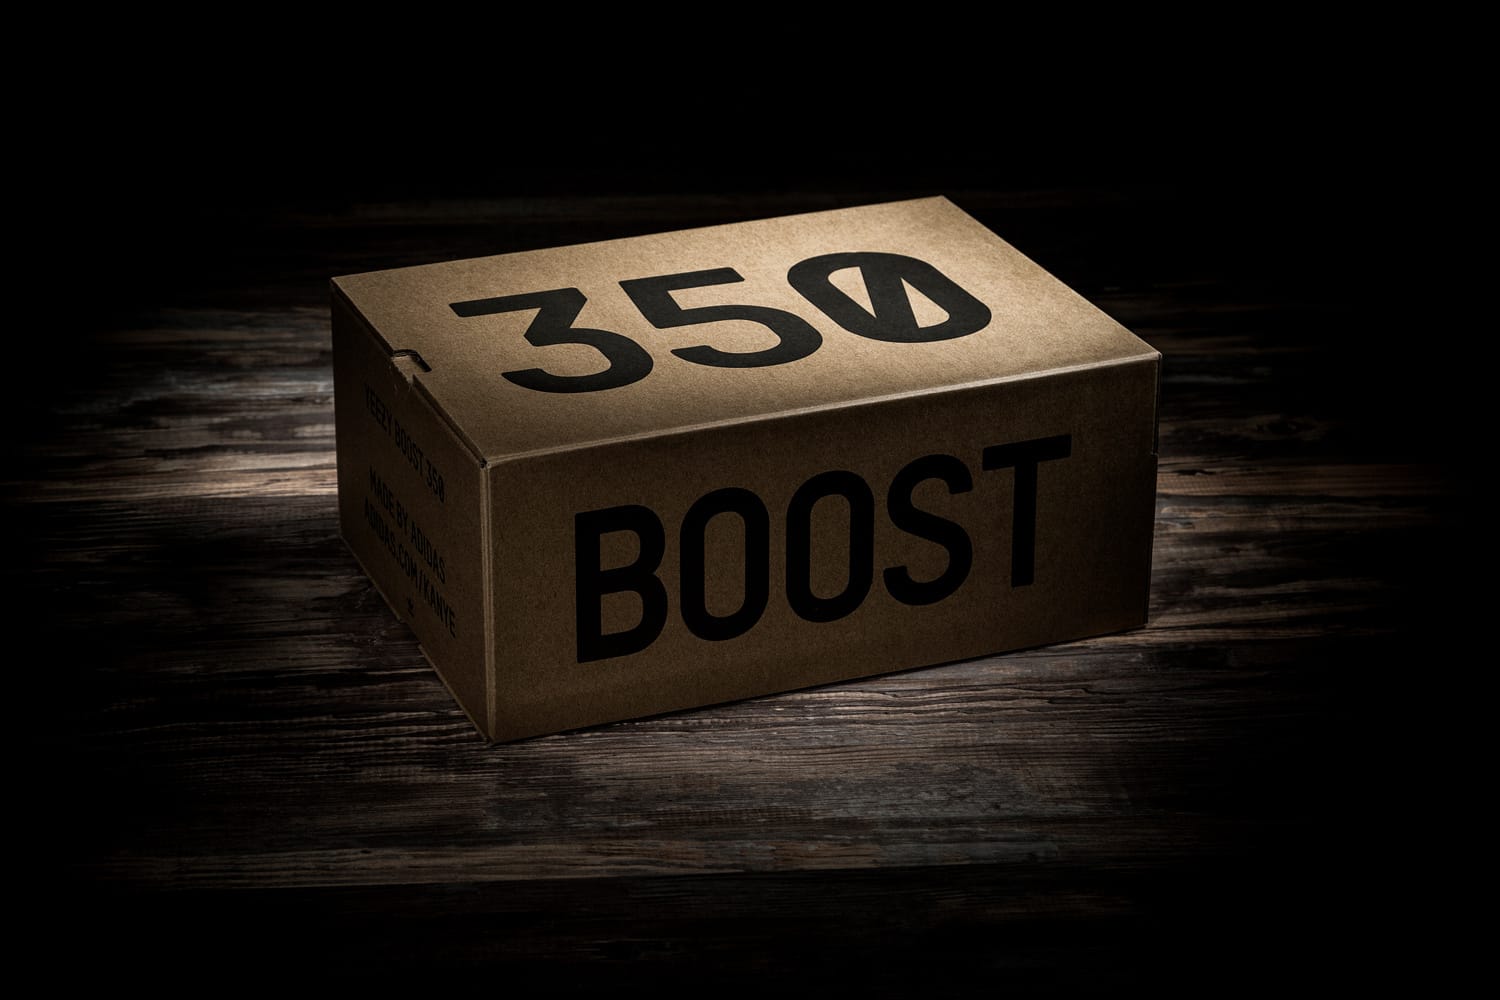 YEEZY Boost 350 V2 Raffle and Giveaway 